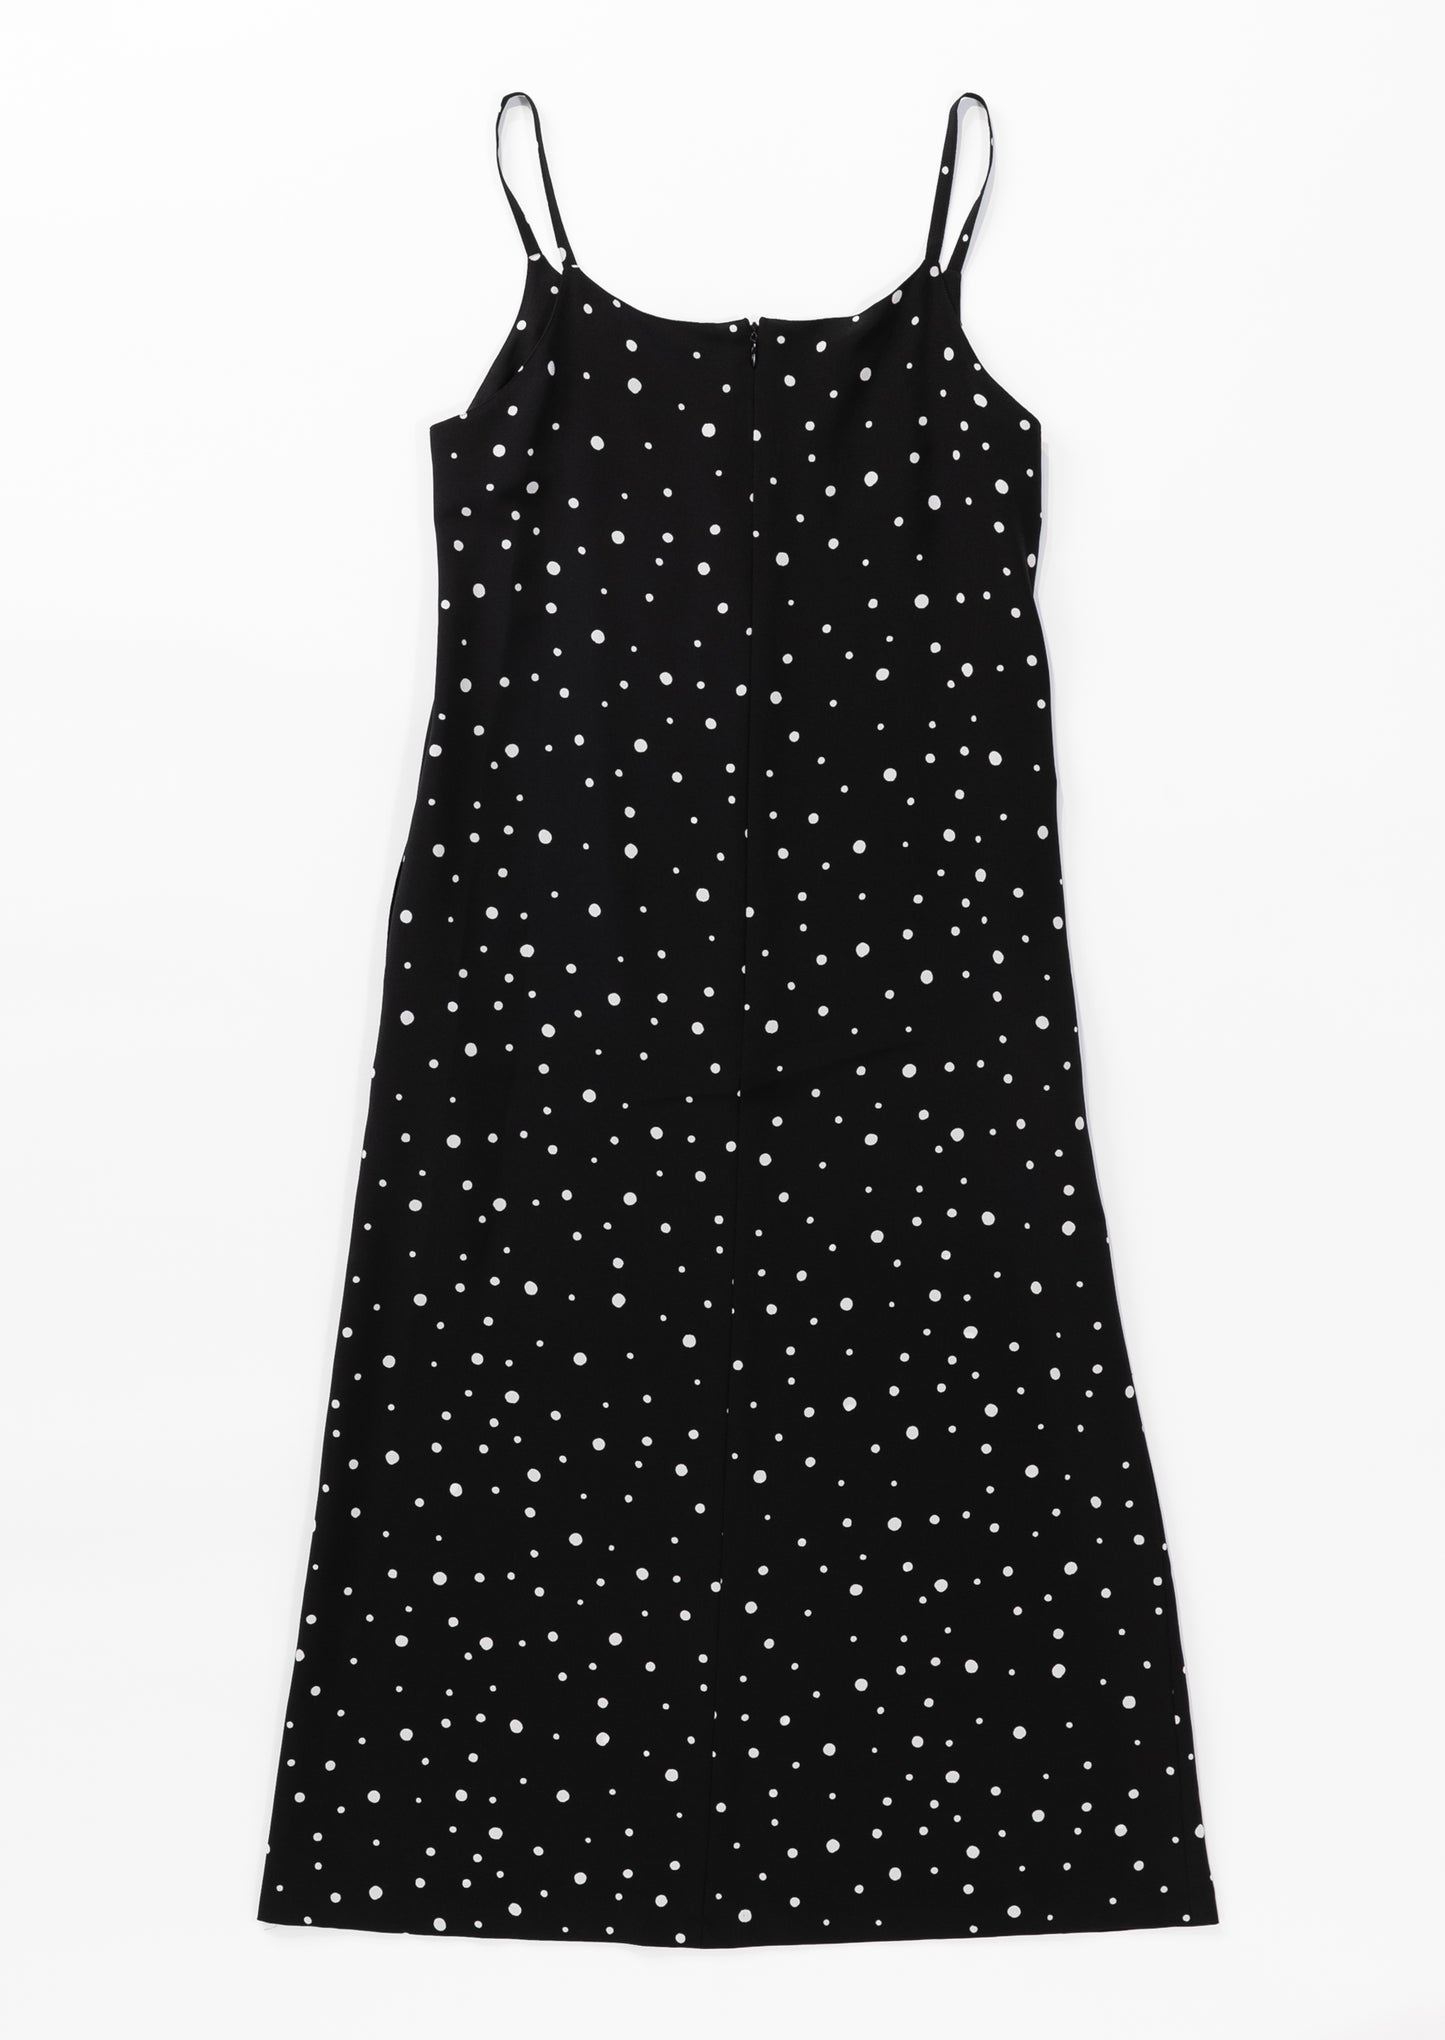 Camisole dress with random dots